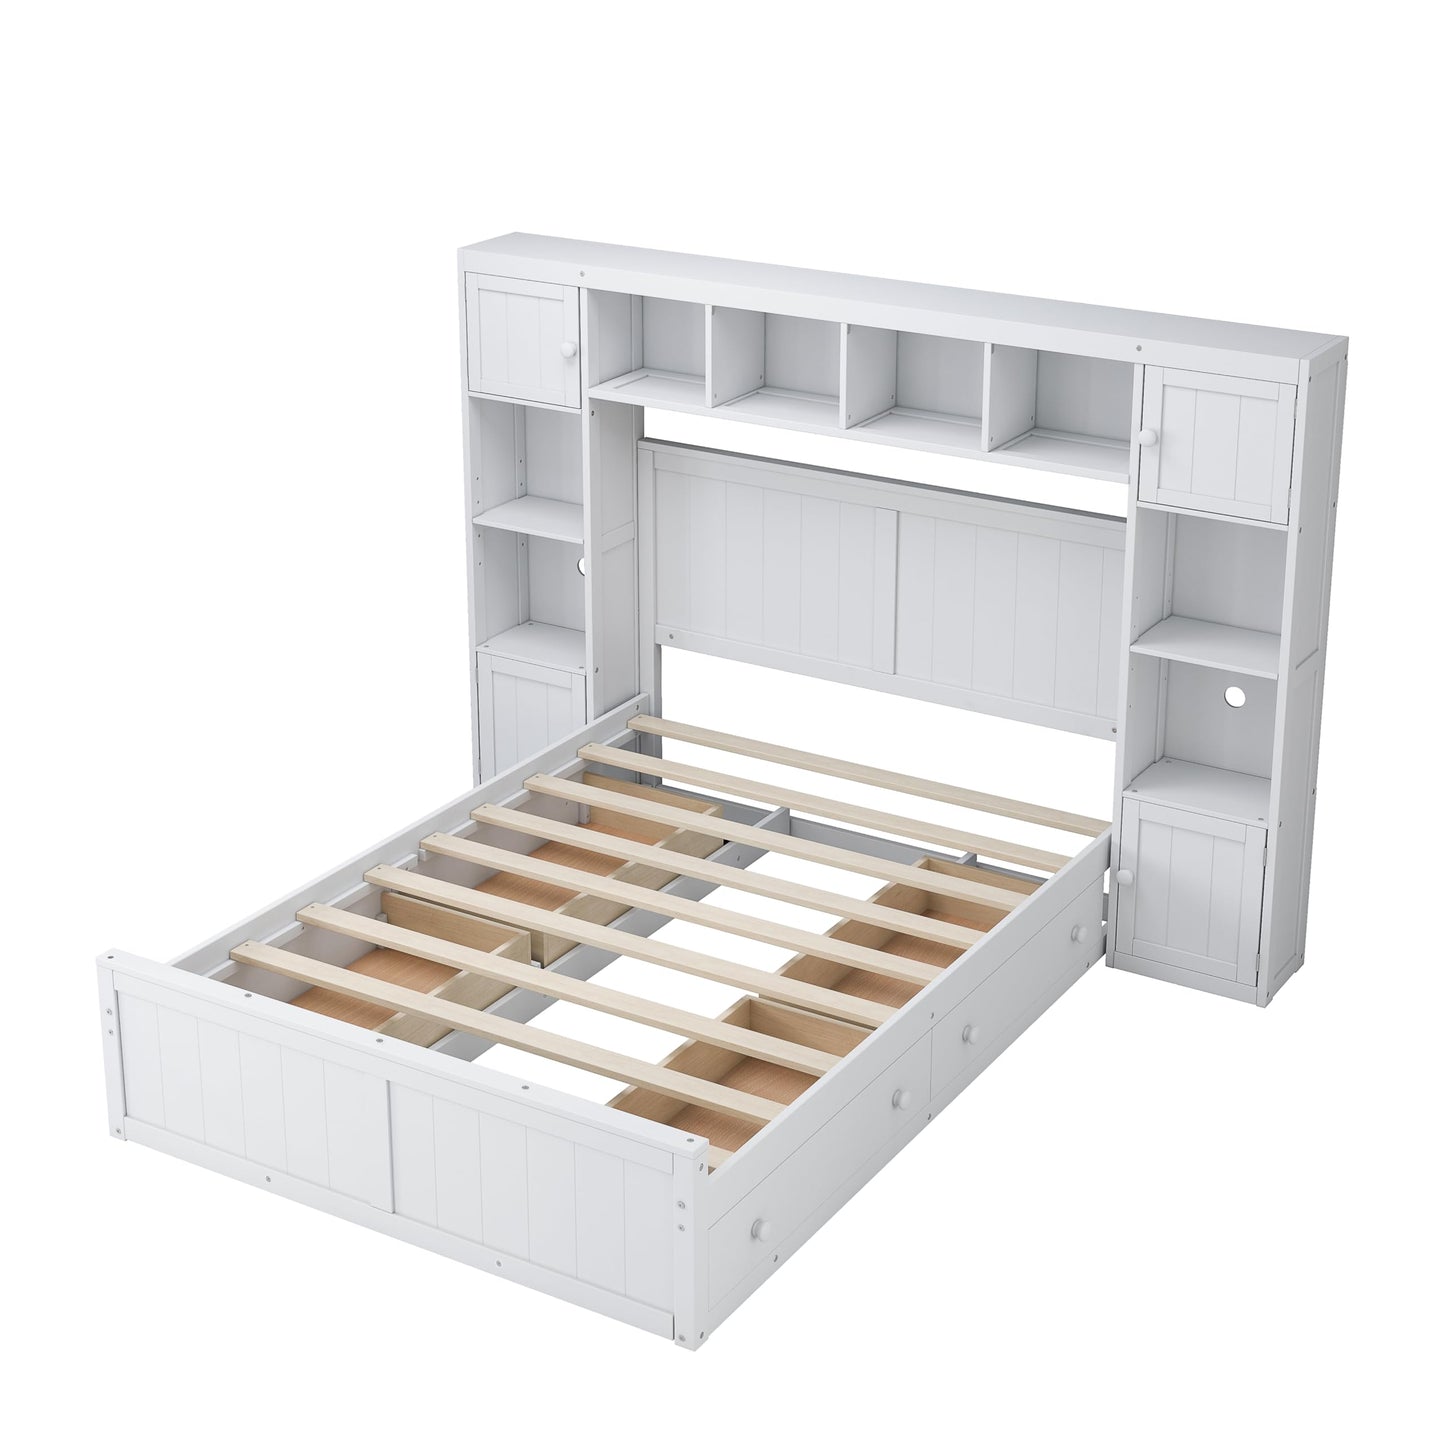 SOFTSEA Full Size Bed with 4 Storage Drawers and All-in-One Cabinet and Shelves, Platform Bed with Storage Headboard for Bedroom, Solid Wood Bed